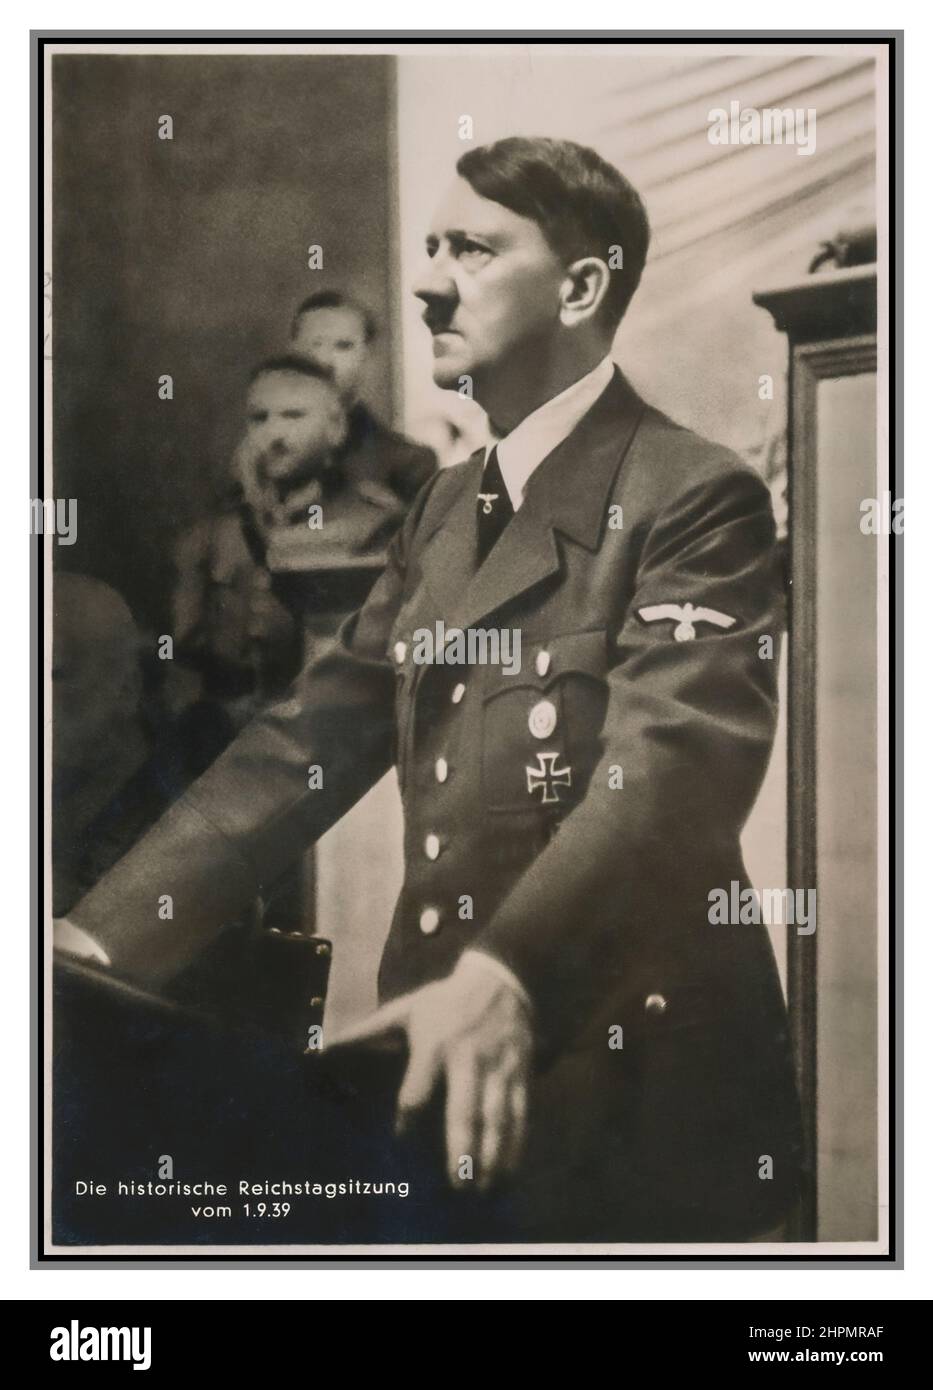 Adolf Hitler on the podium giving his famous war speech to the Reichstag  1-9-1939 Berlin Nazi Germany Stock Photo